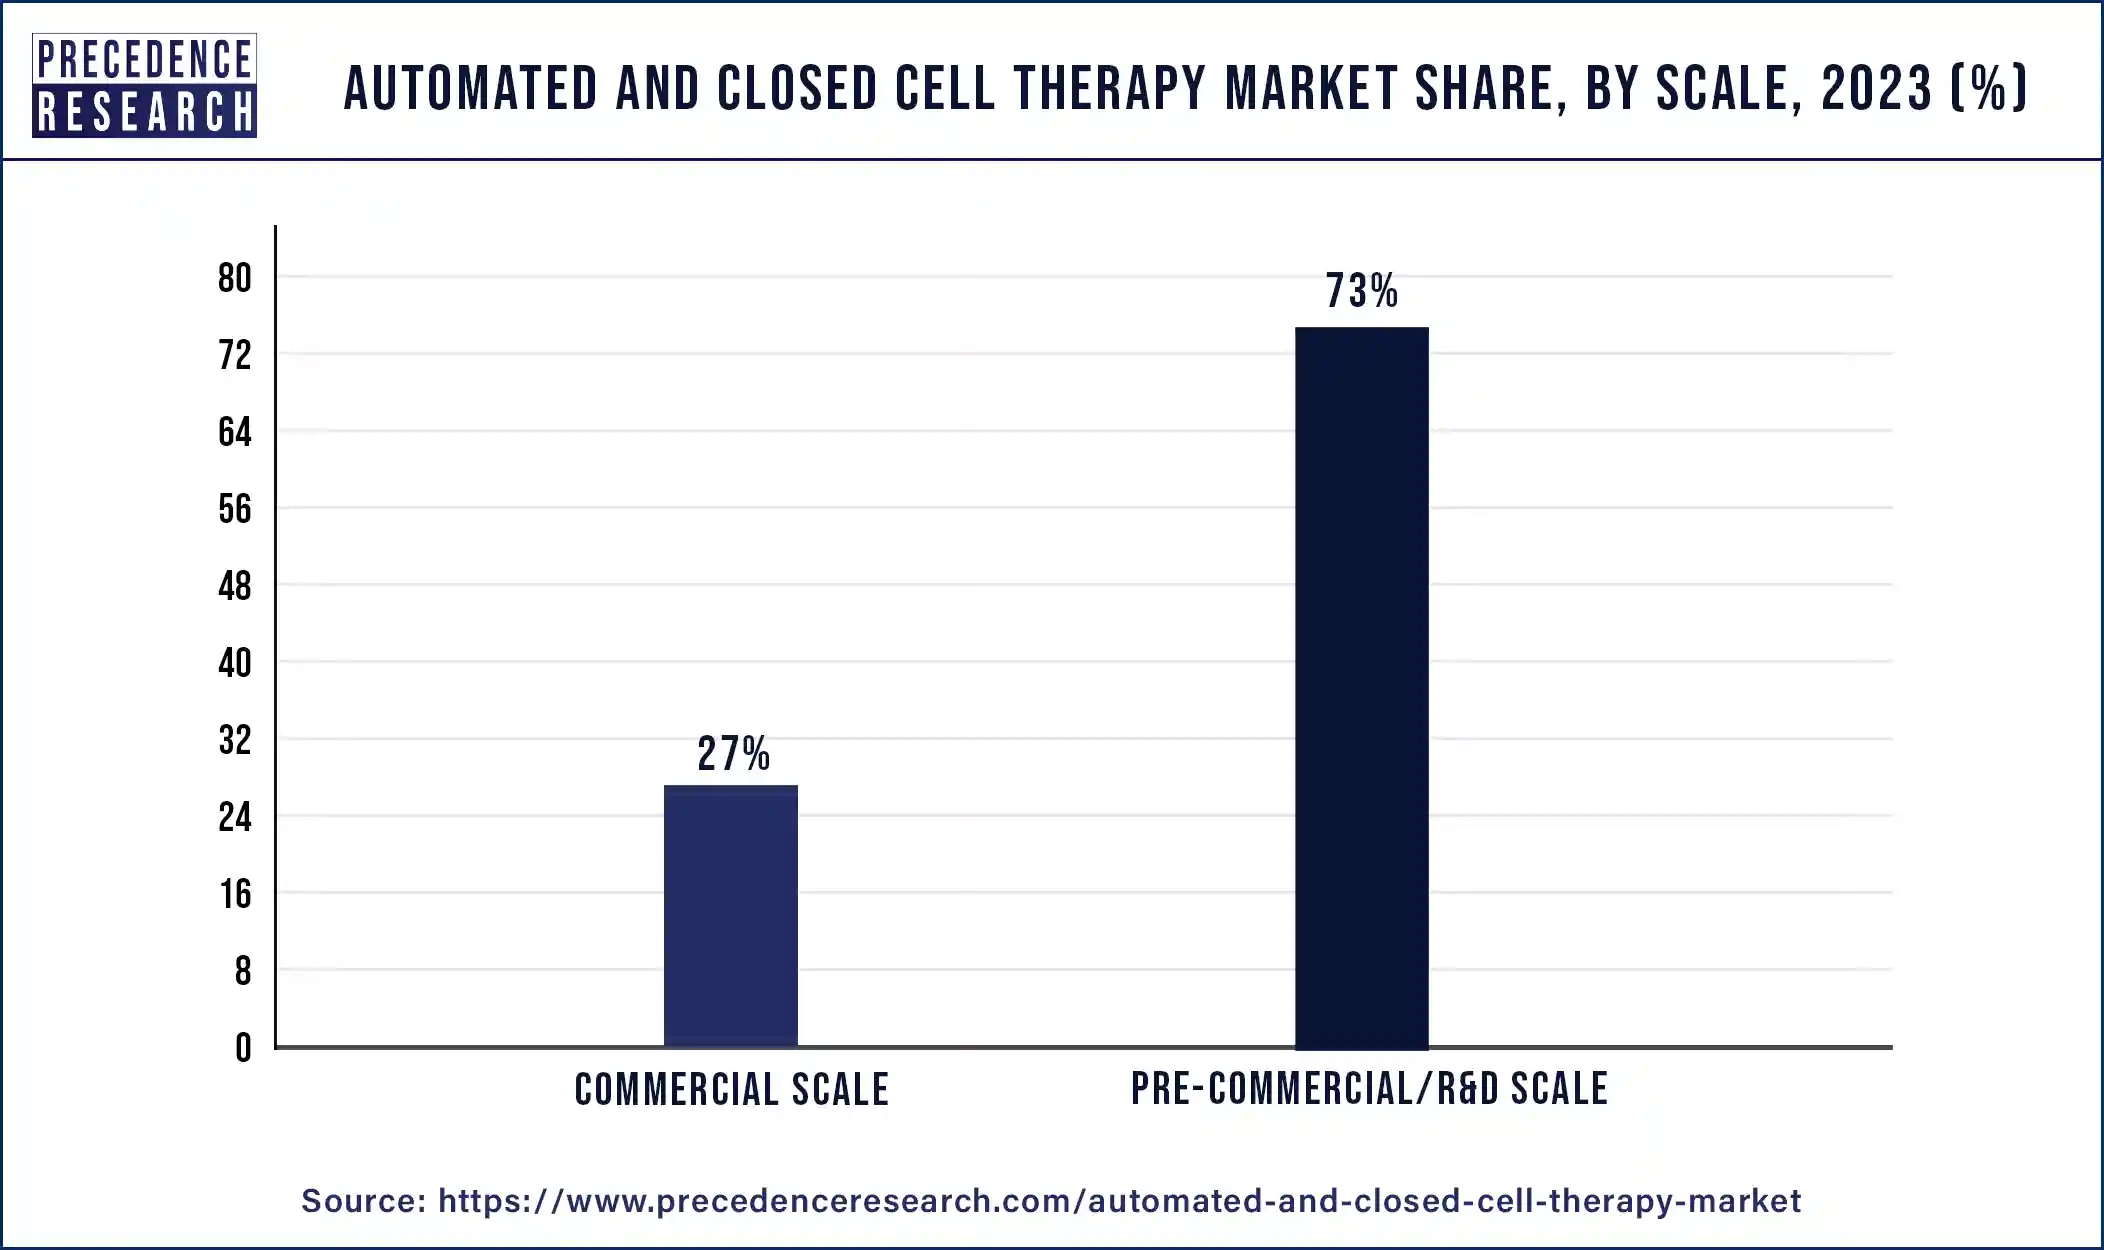 Automated and Closed Cell Therapy Market Share, By Scale, 2023 (%)